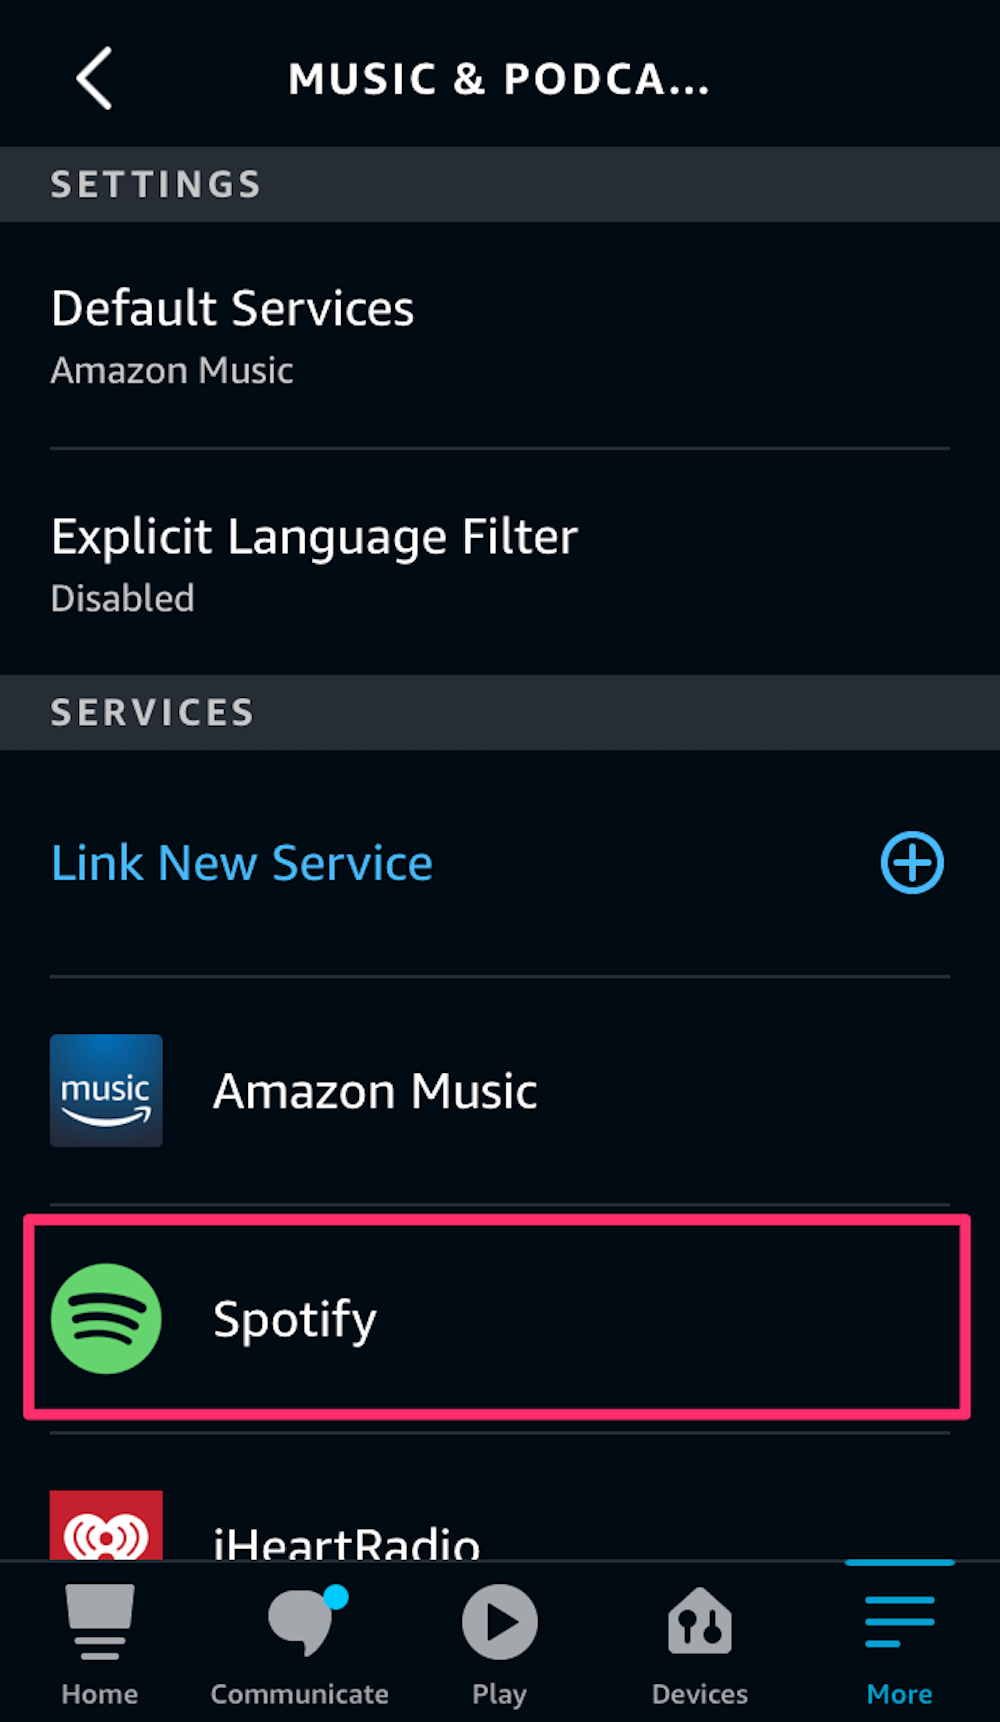 Screenshot of the Music & Podcasts section of settings in the Alexa app